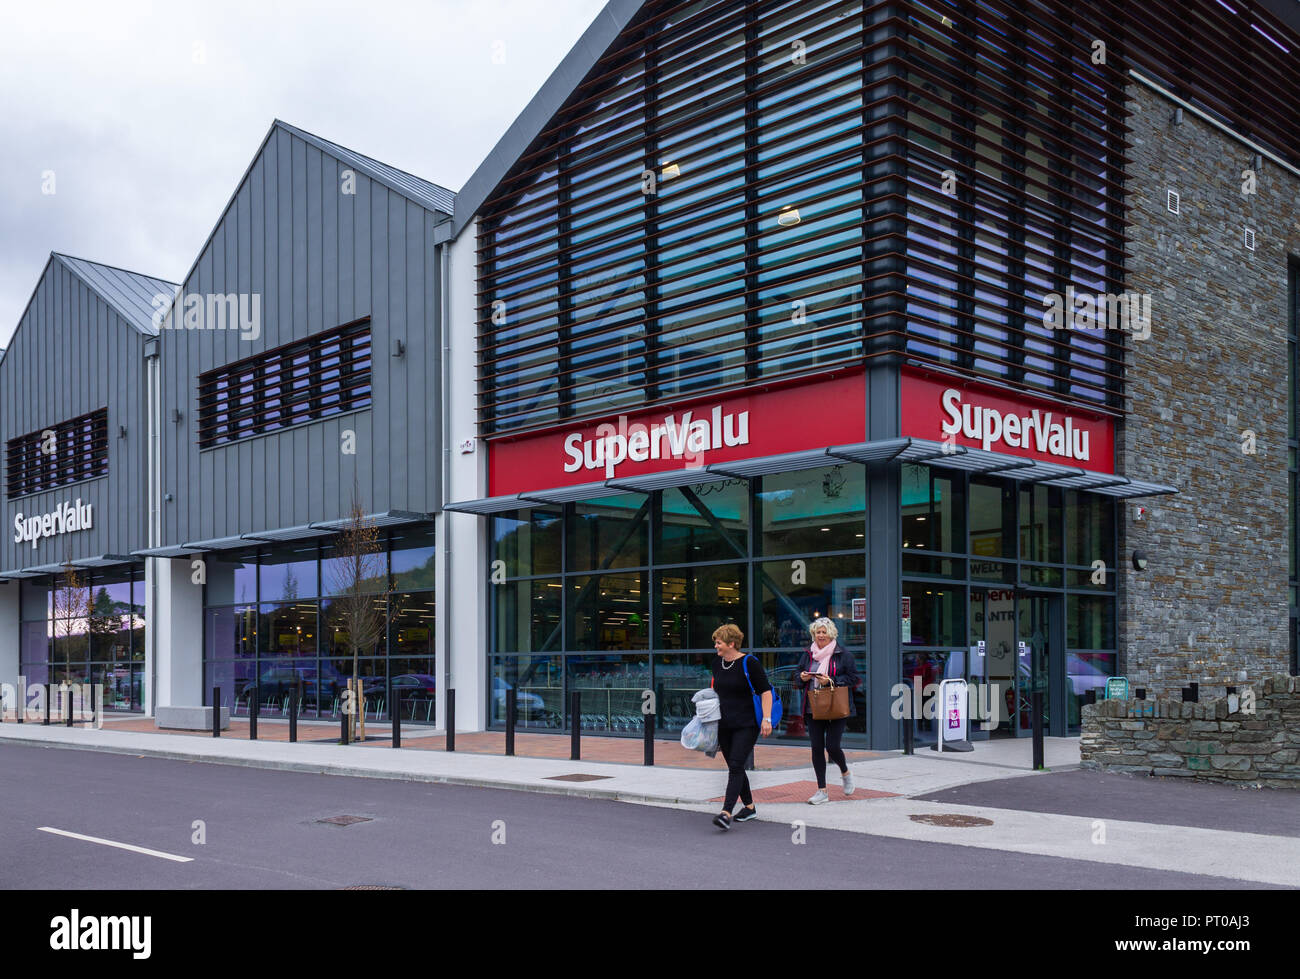 Shoppers leaving a supervalu supermarket or retail store in Bantry West Cork Ireland Stock Photo